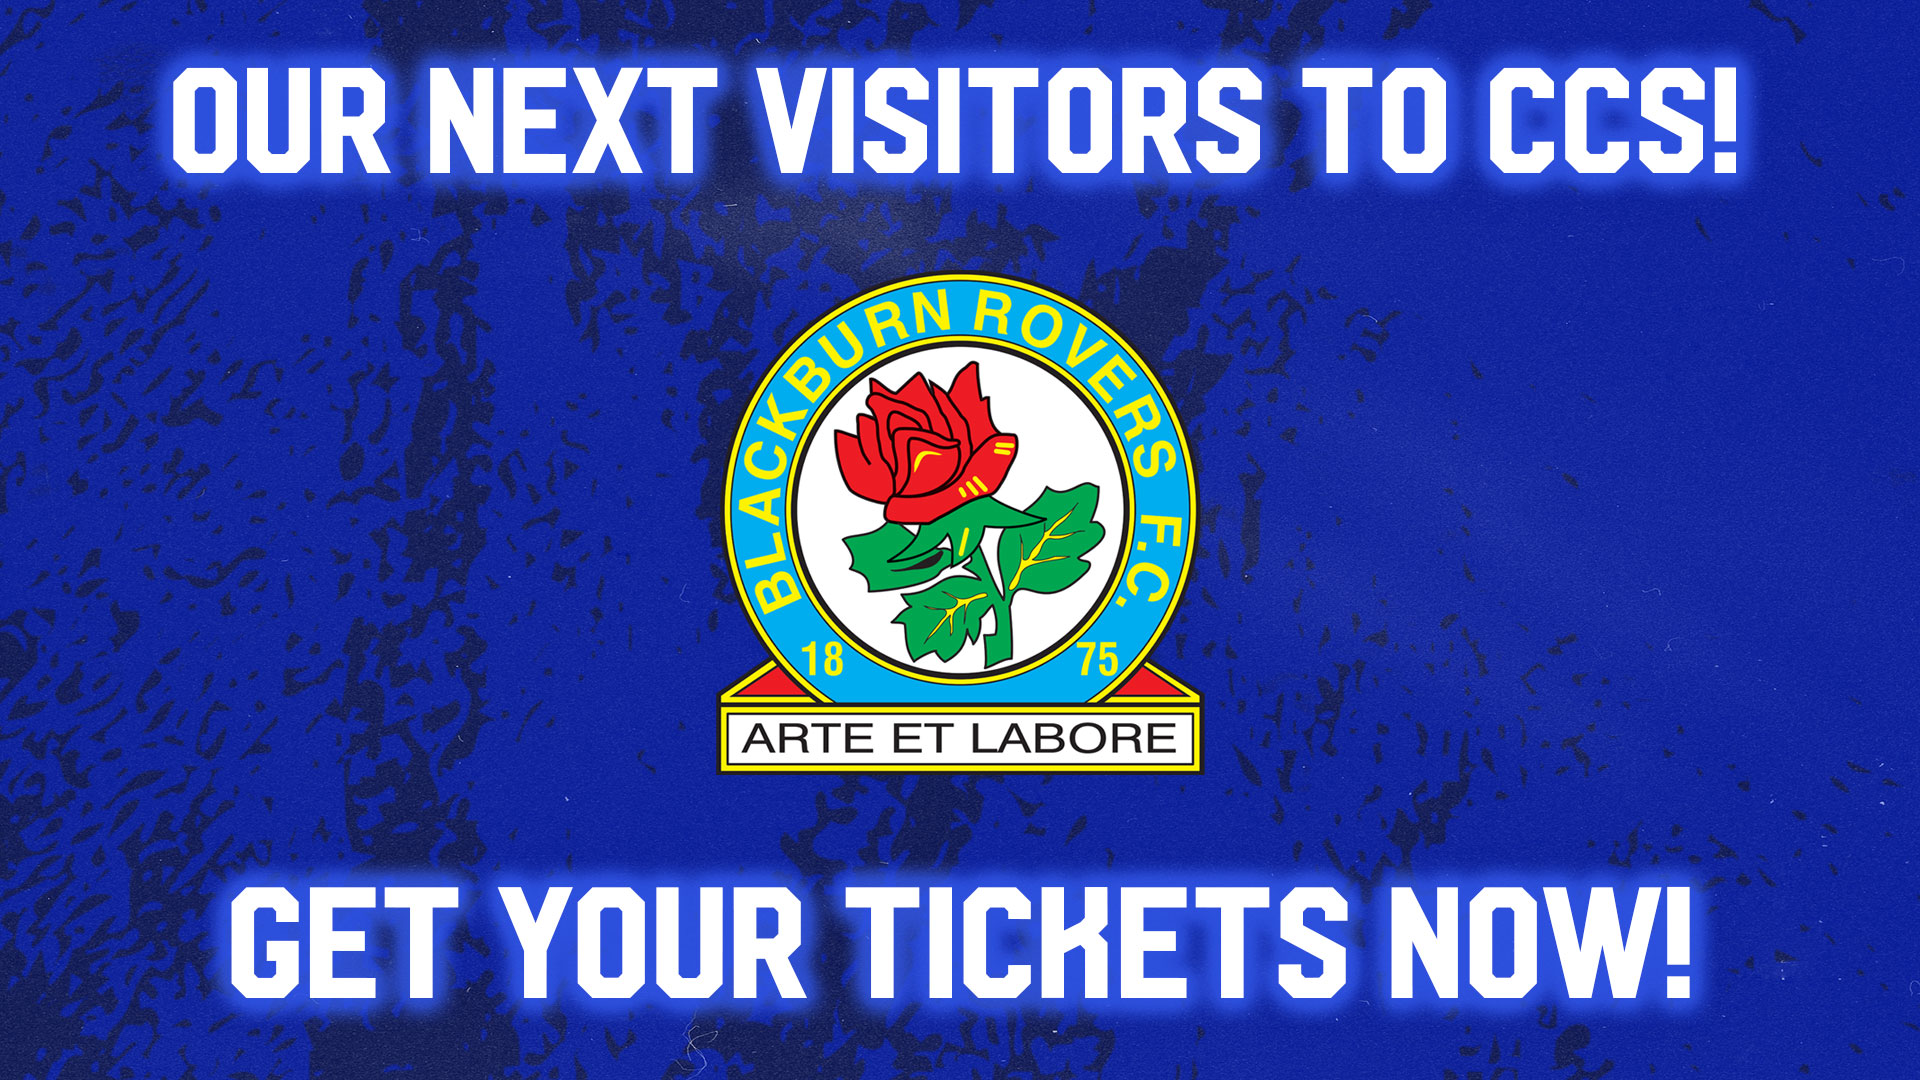 The Bluebirds take on Blackburn Rovers this Tuesday night...